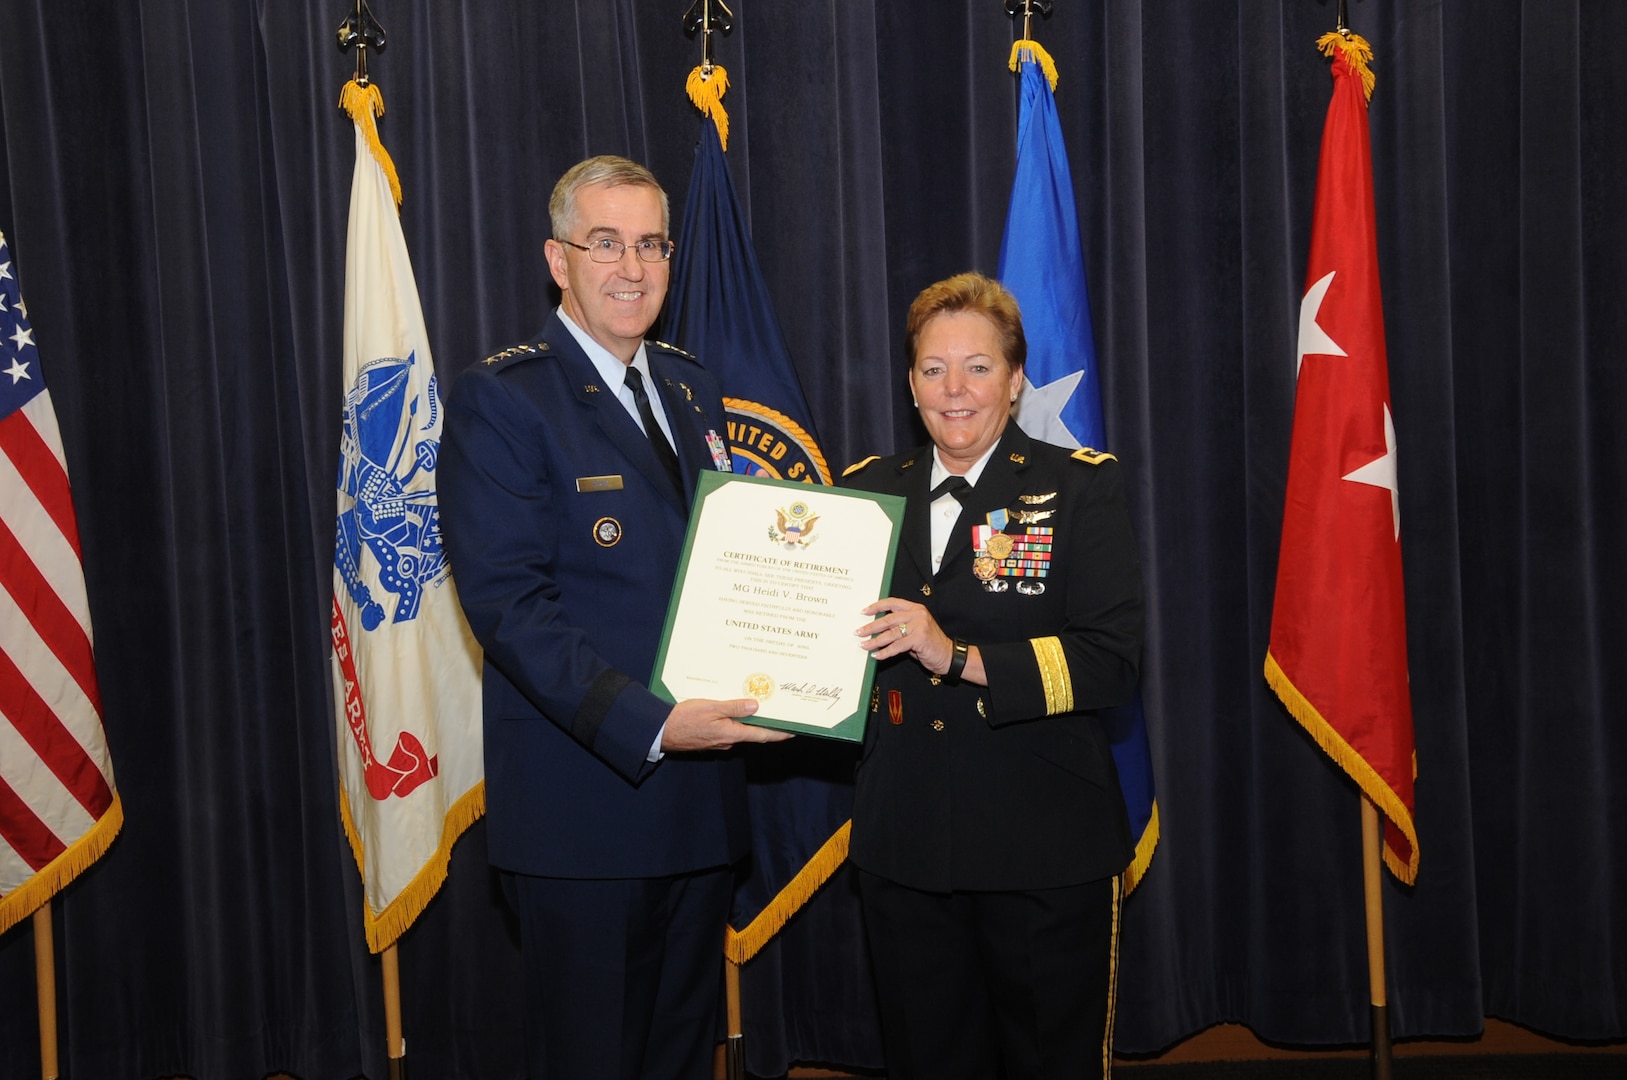 U.S. Air Force Gen. John E. Hyten, commander of U.S. Strategic Command (USSTRATCOM), presents the Certificate of Retirement to U.S. Army Maj. Gen. Heidi V. Brown, USSTRATCOM director of global operations, during a ceremony in the 557th Weather Wing auditorium, Offutt Air Force Base, Neb., Feb. 24, 2017. Brown served more than 35 years in the U.S. Army and will effectively retire Apr. 1, 2017.  Brown holds many distinctions, including the first woman to command and lead a U.S. Army brigade into combat, the first female general in the U.S. Army Air Defense Artillery Branch, the senior female combat arms officer in the Army, the first female combatant command operations director and the first soldier to serve as USSTRATCOM director of global operations.  Brown arrived at USSTRATCOM in February 2015, after serving as Missile Defense Agency’s test director at Fort Belvoir, Md.  One of nine DoD unified combatant commands, USSTRATCOM has global strategic missions assigned through the Unified Command Plan that include strategic deterrence; space operations; cyberspace operations; joint electronic warfare; global strike; missile defense; intelligence, surveillance and reconnaissance; and analysis and targeting.